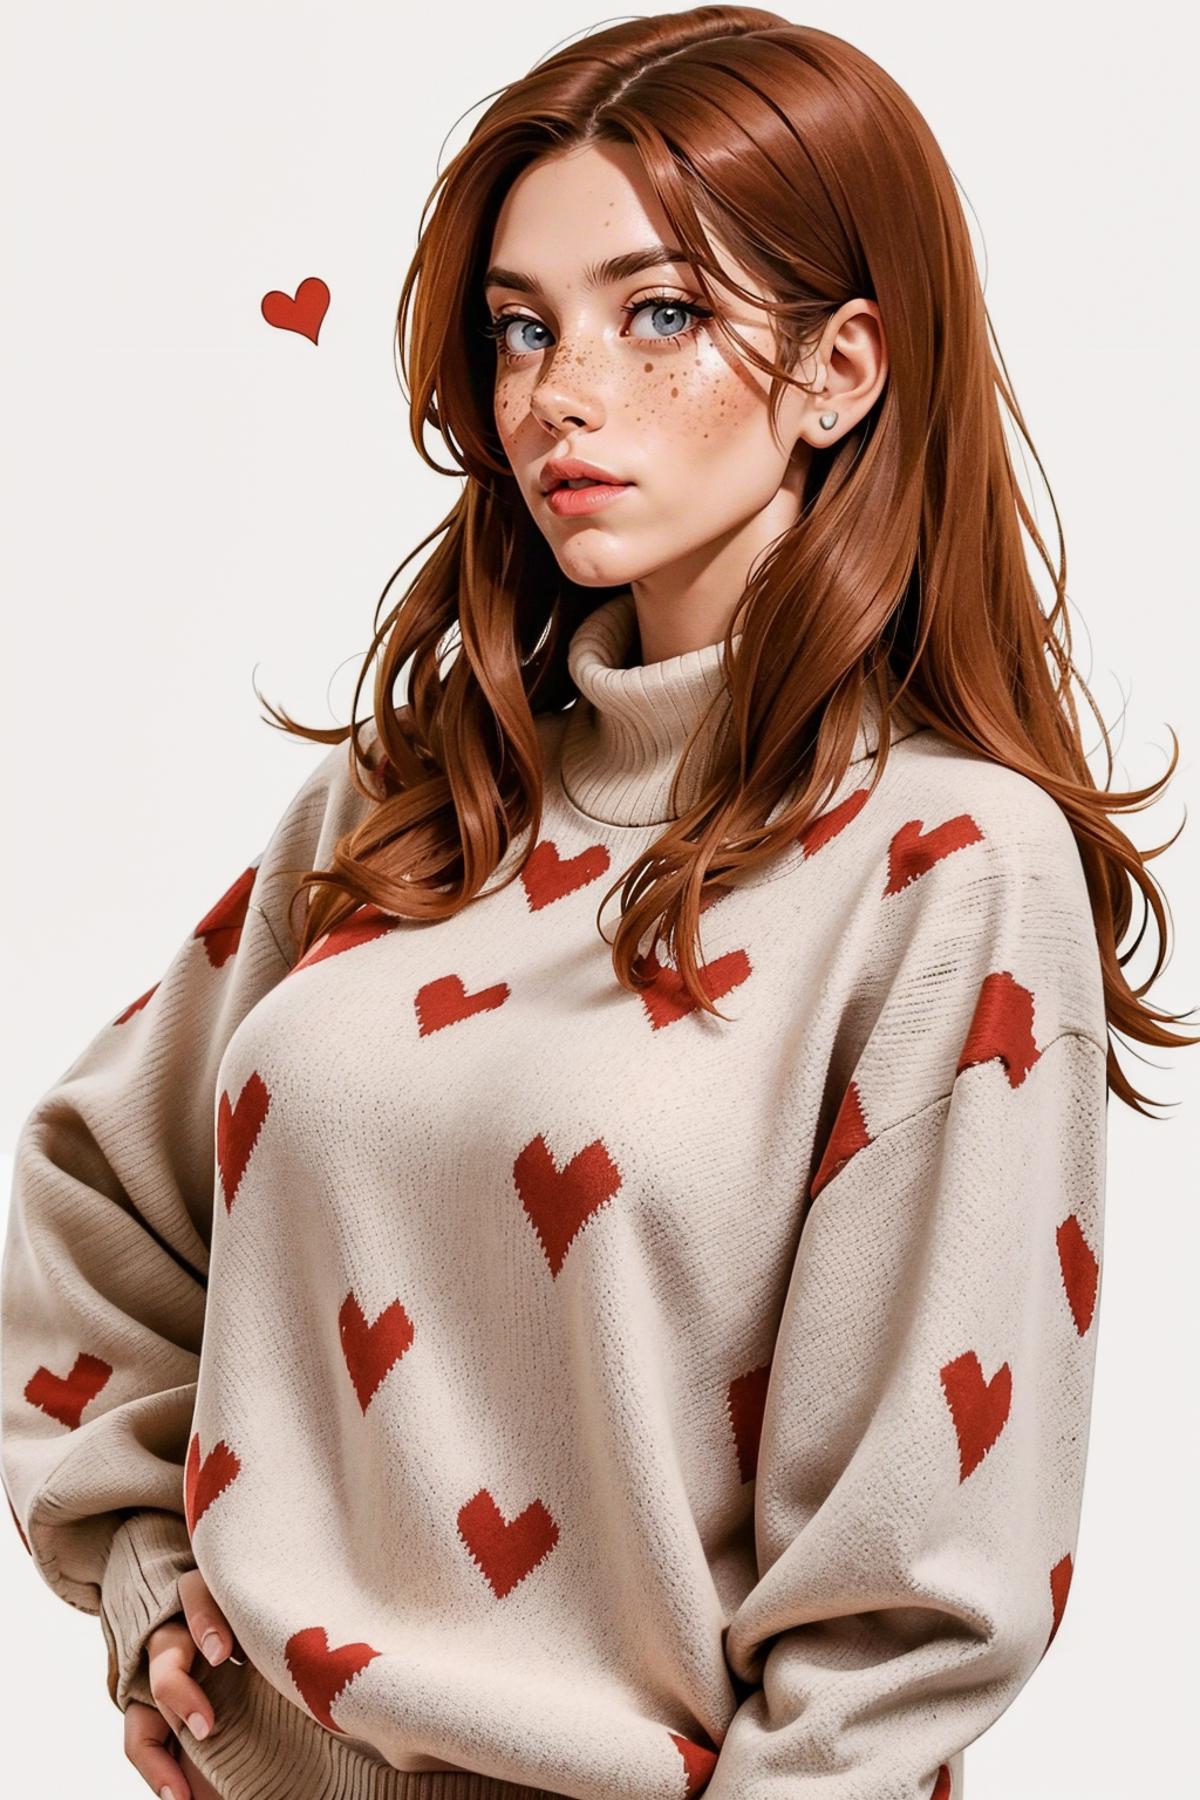 A woman wearing a sweater with hearts on it posing for a picture.